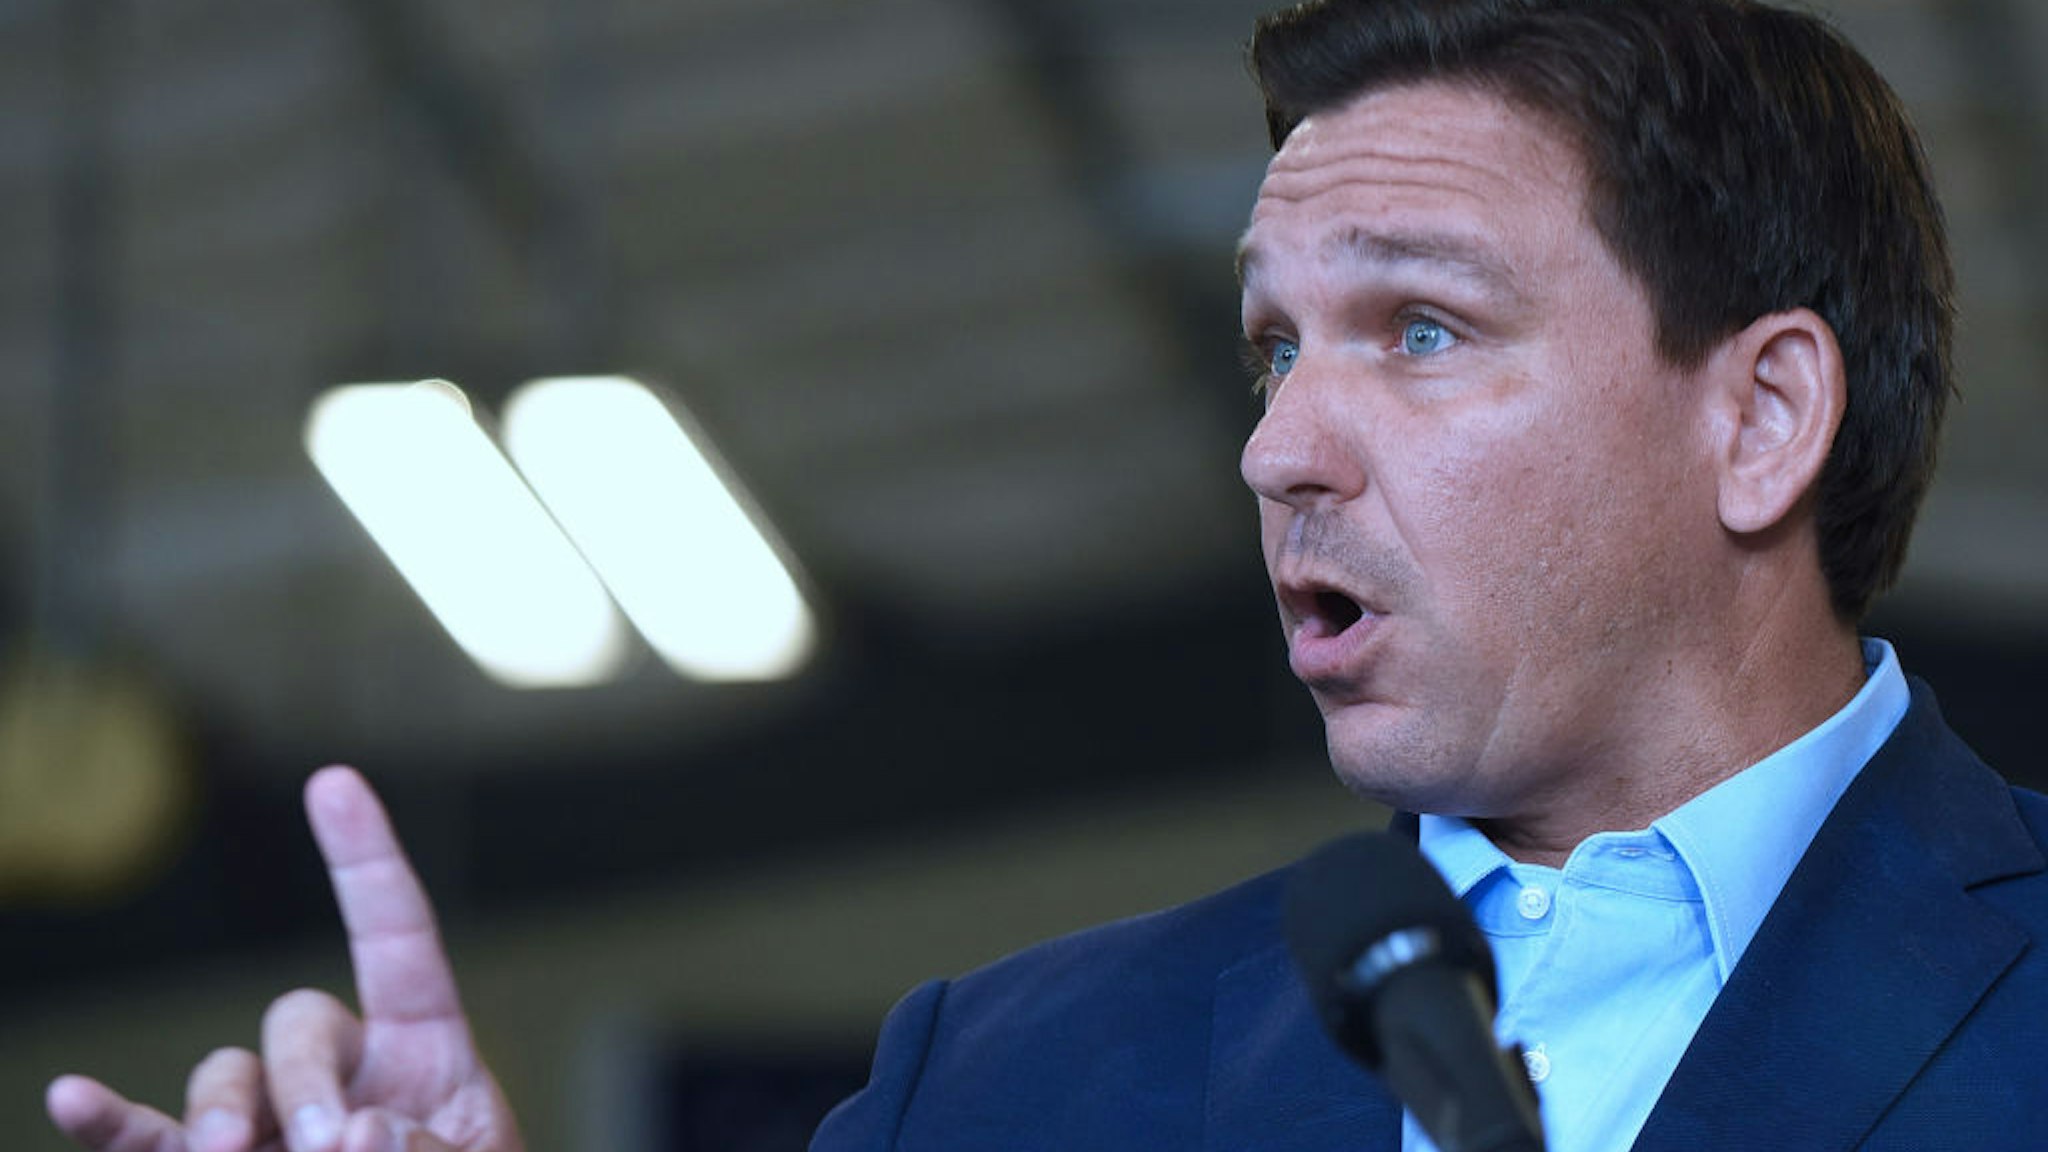 Florida Governor, Ron DeSantis responds to a question from the media at a press conference at the Eau Gallie High School aviation hangar.